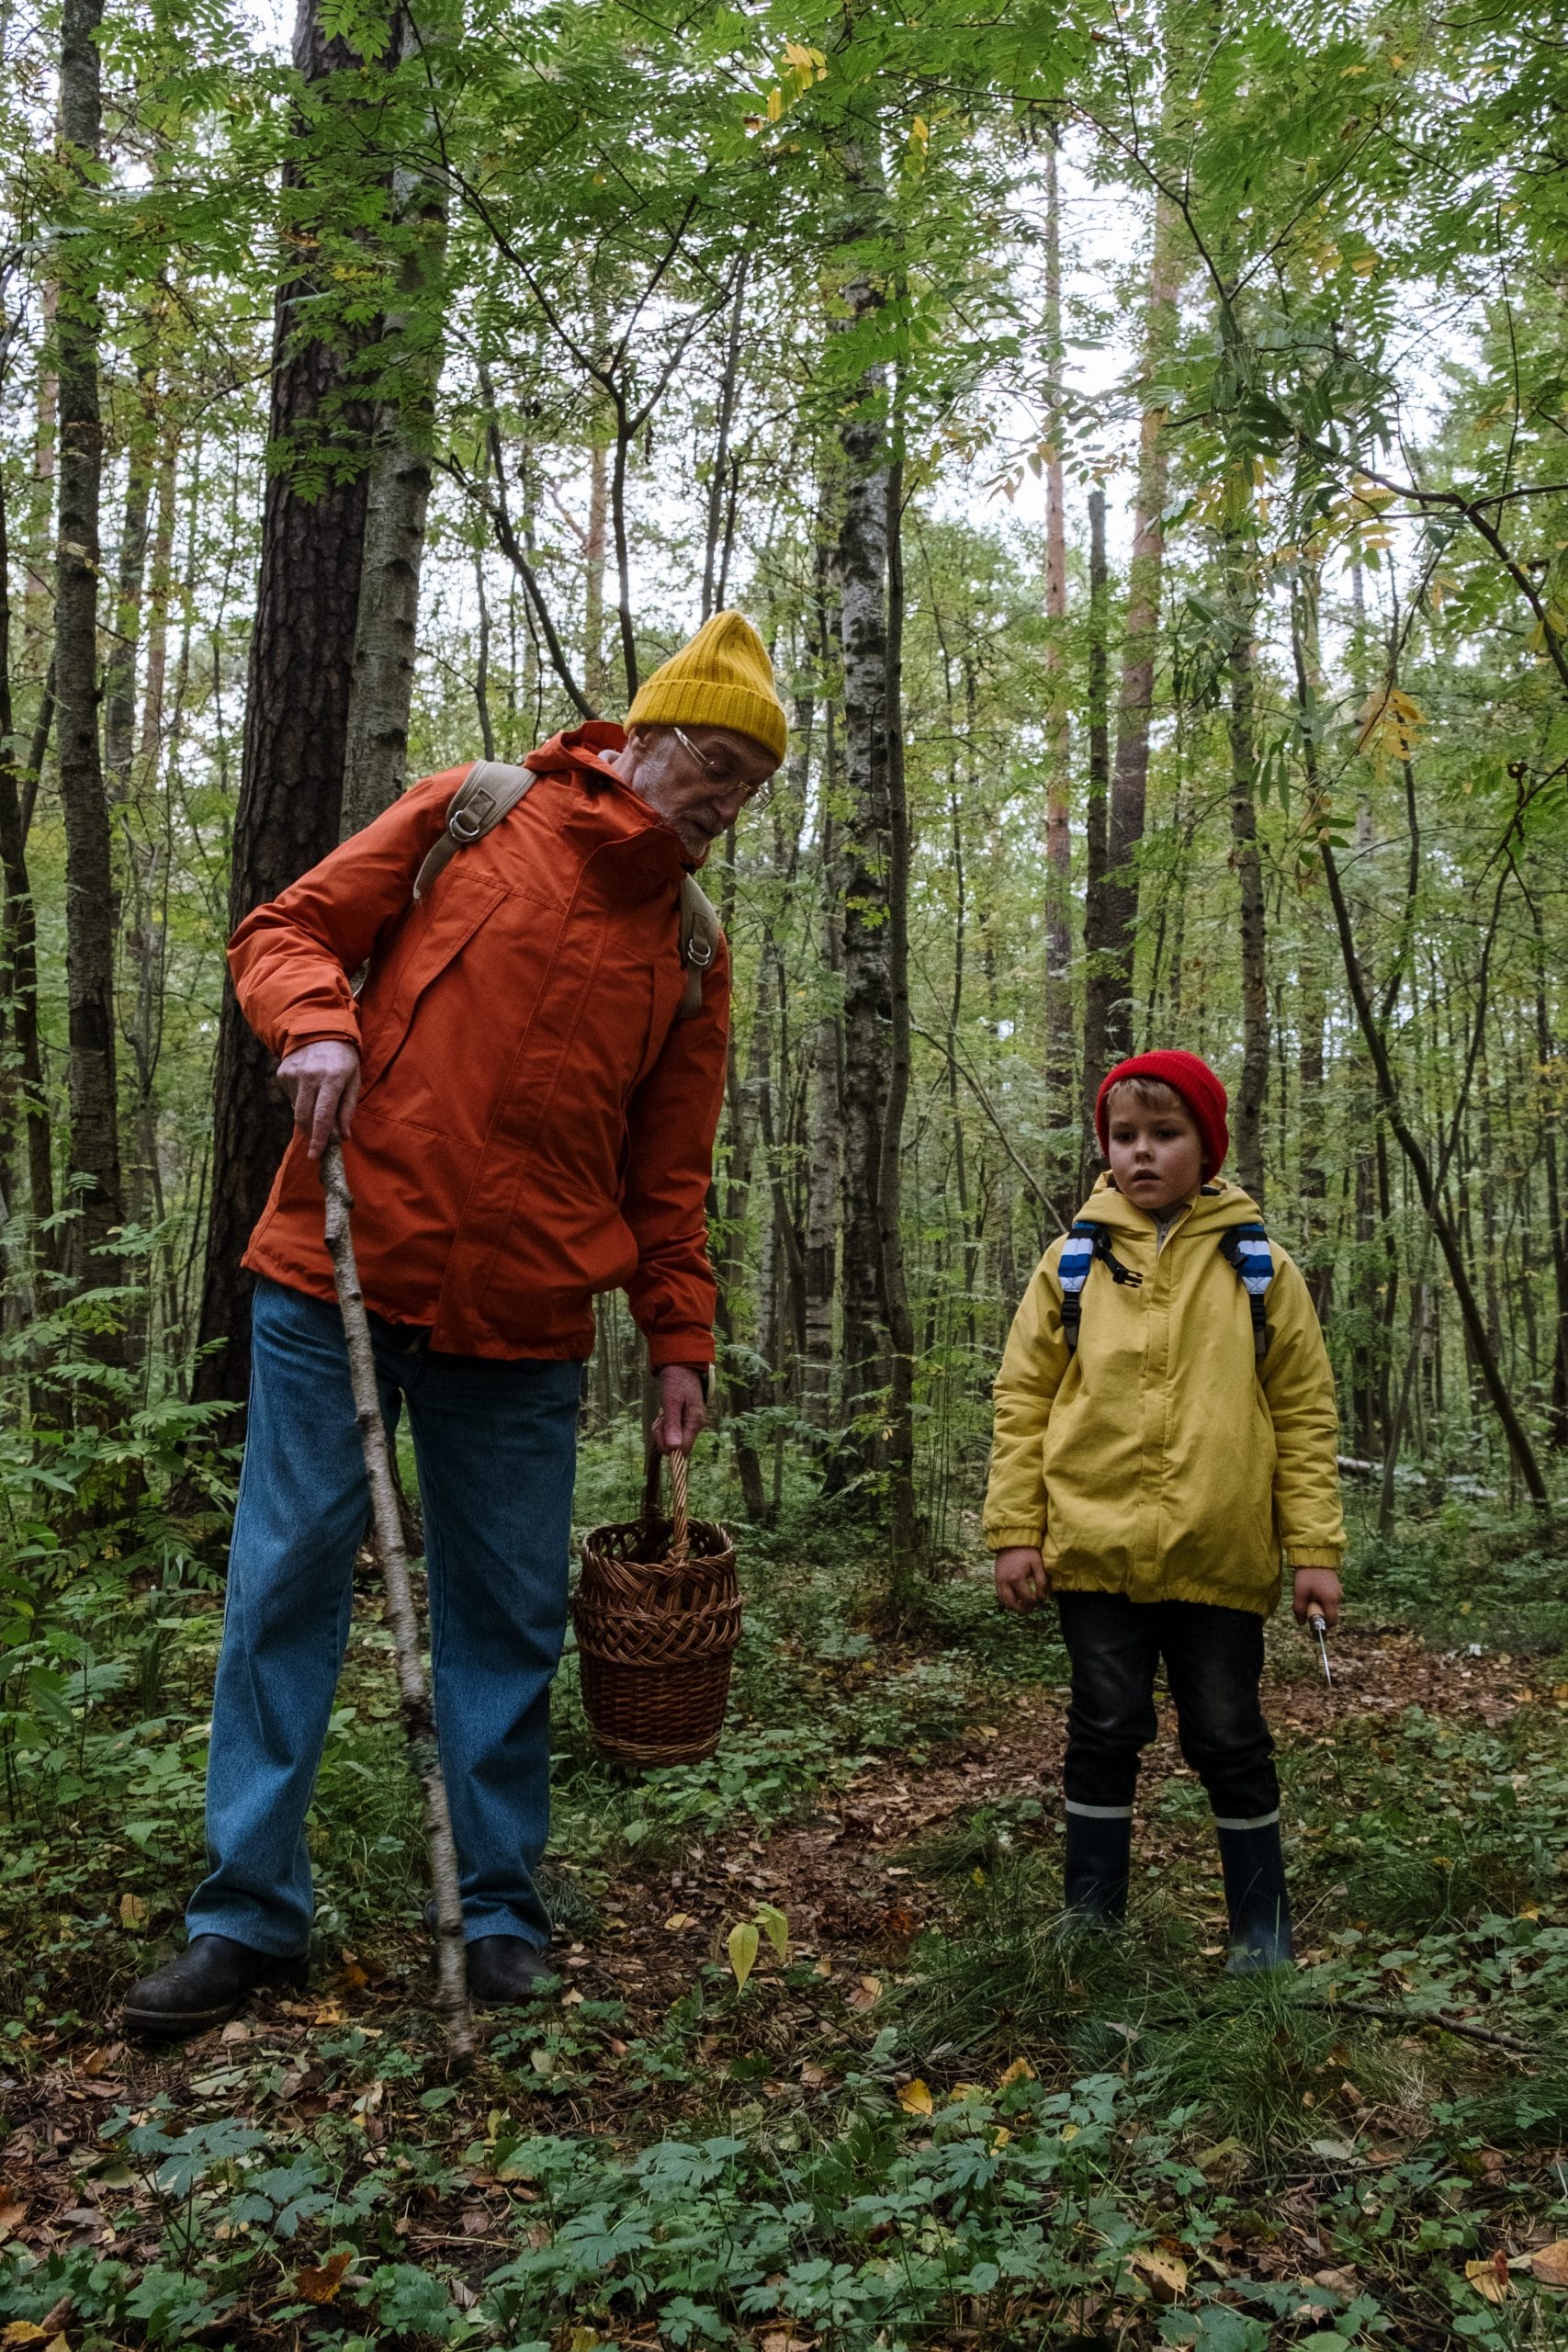 grandpa and young child with hats and rancoats hiking in wooded forest. Looking cold and rainy